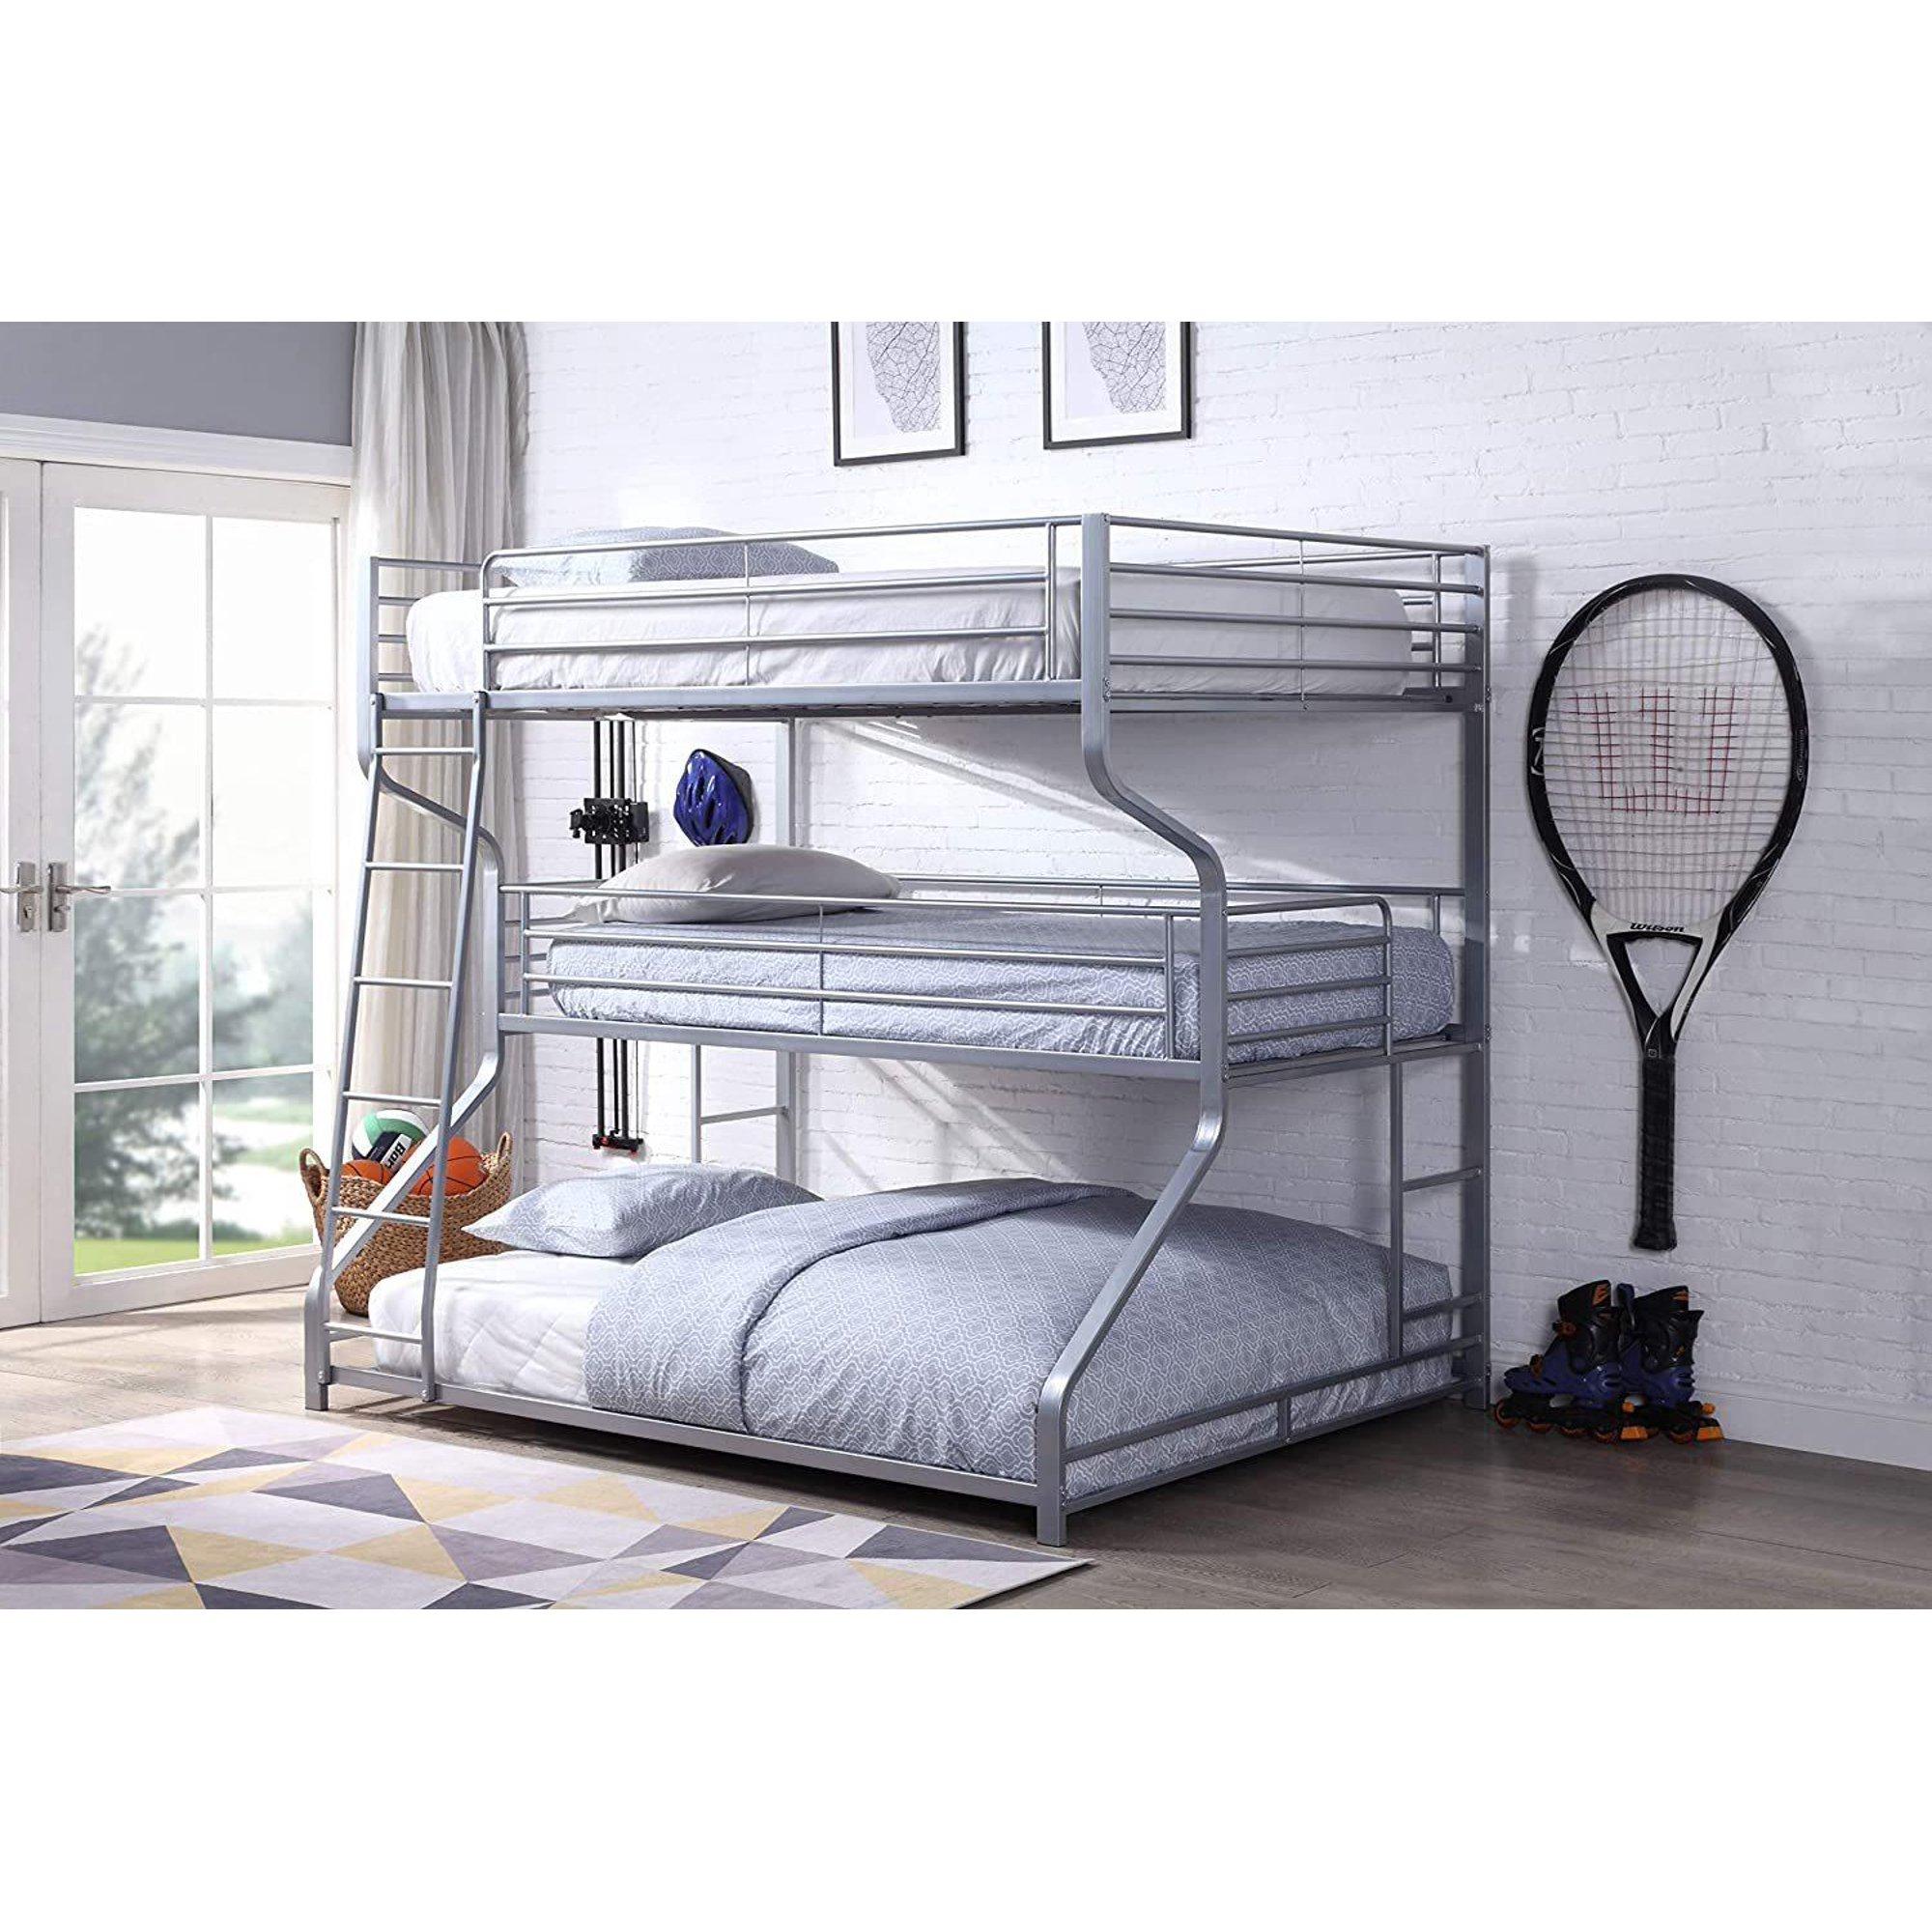 Simple Twin/Full/Queen Bunk Bed Caius II 37790 in Silver 